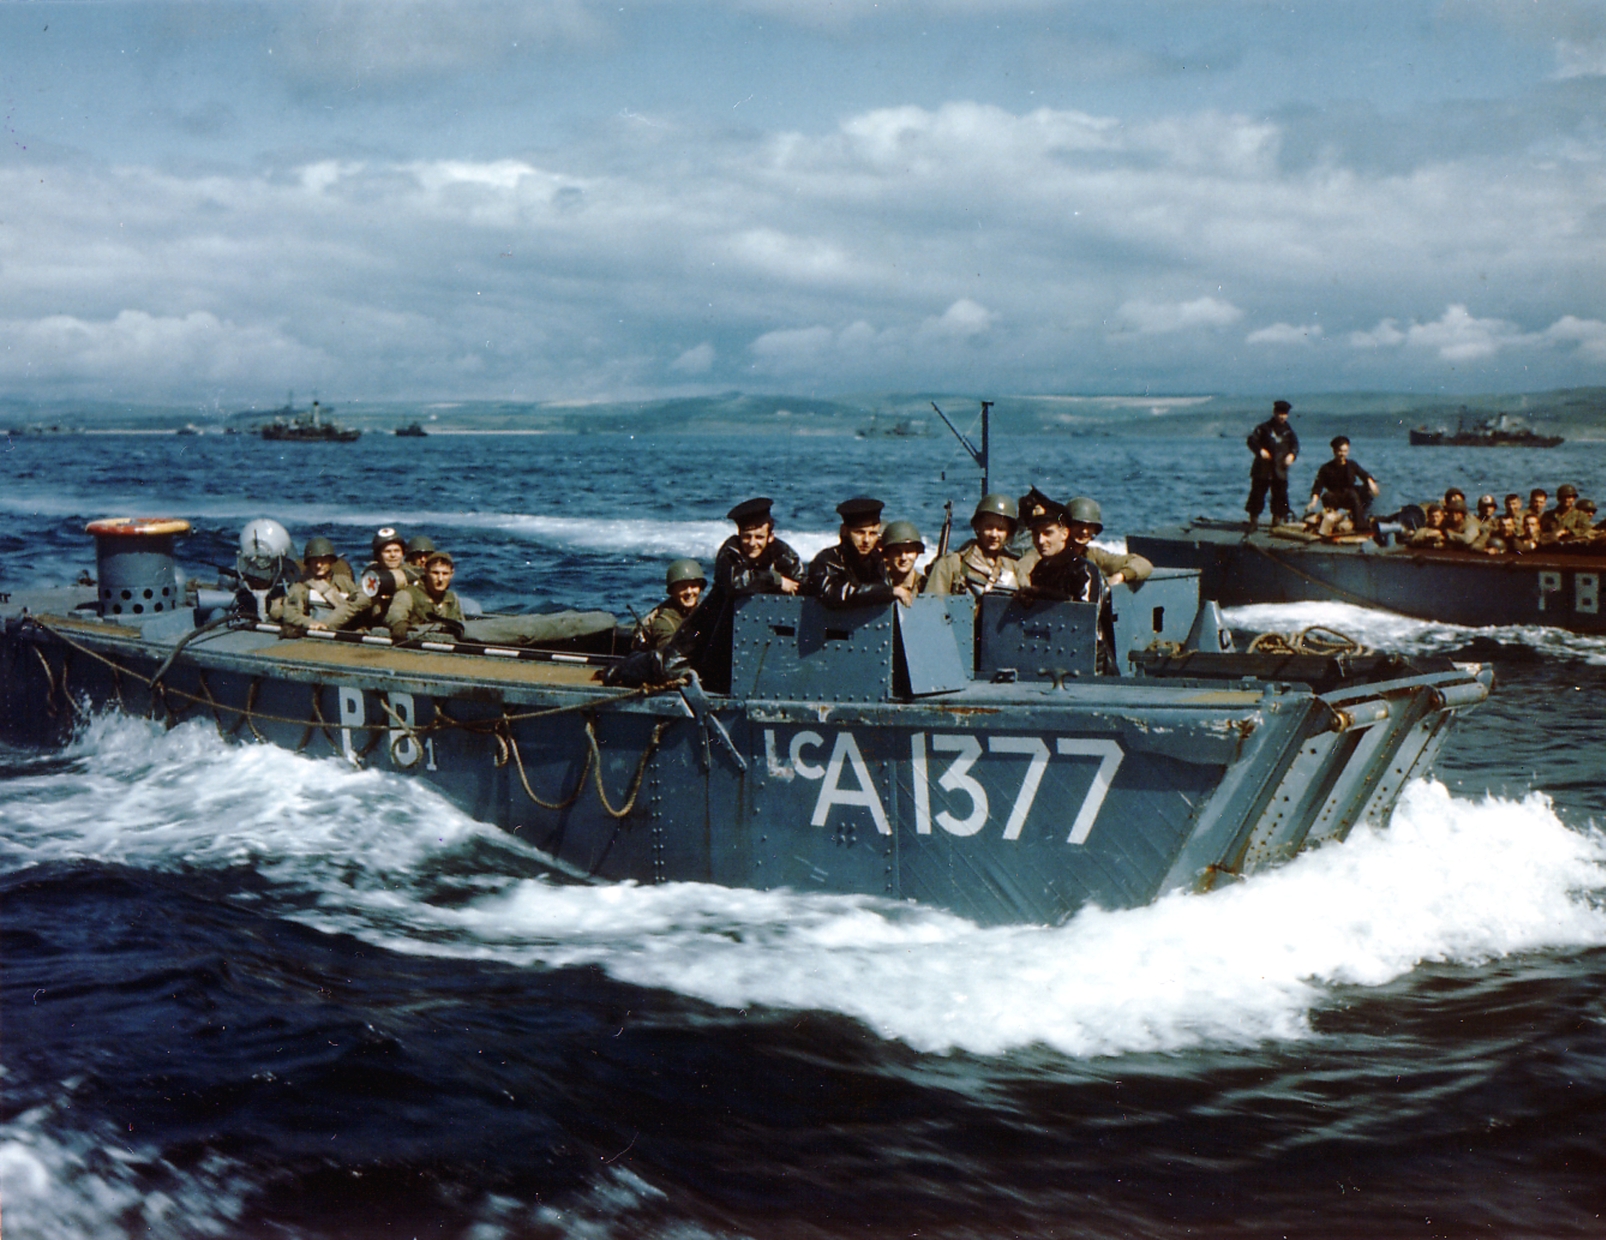 British LCA 1377 with US soldiers on a naval mission.